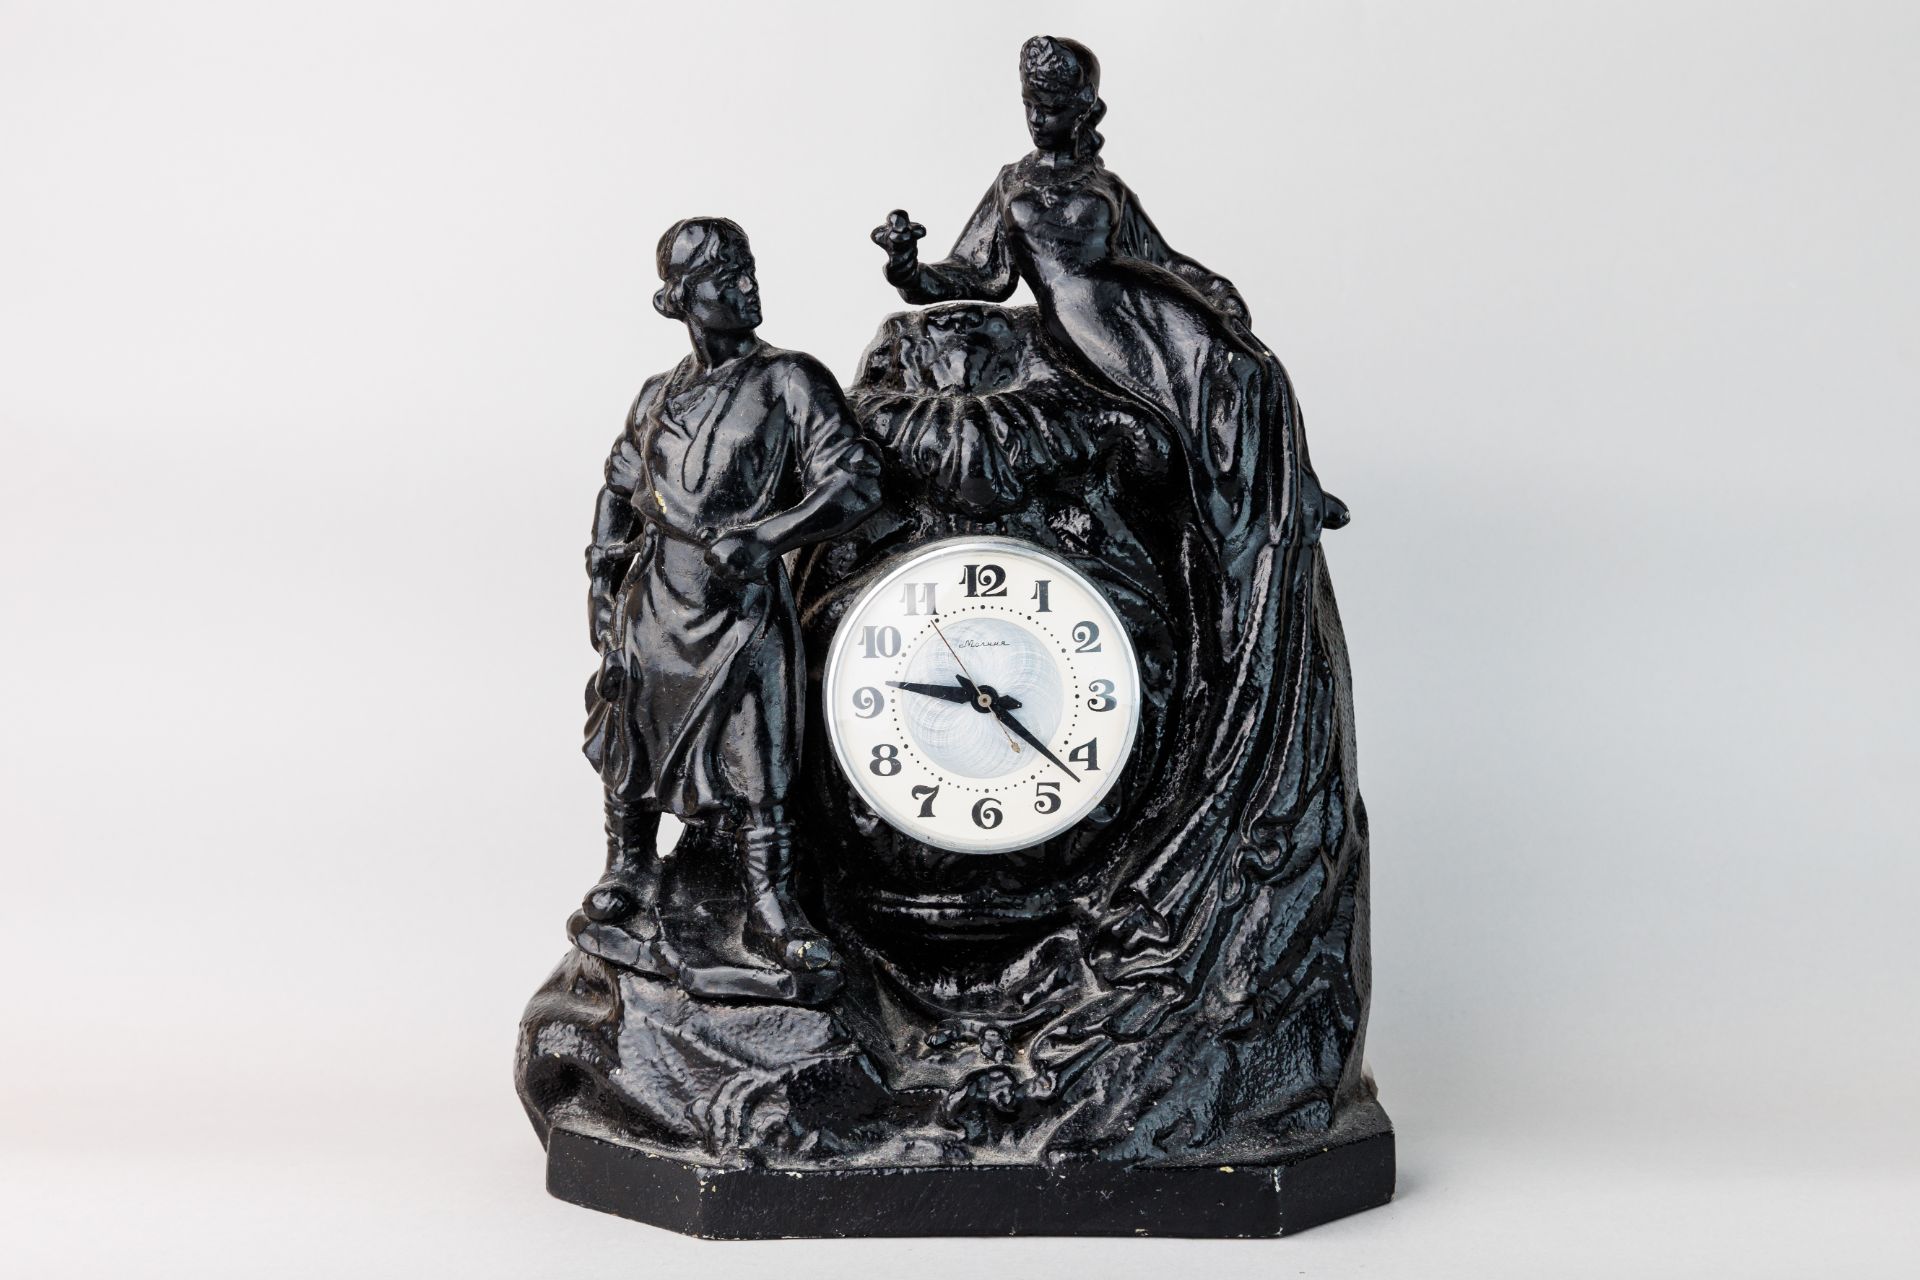 Mechanical Table Clock "Mistress of Copper Mountain and Danila Master"